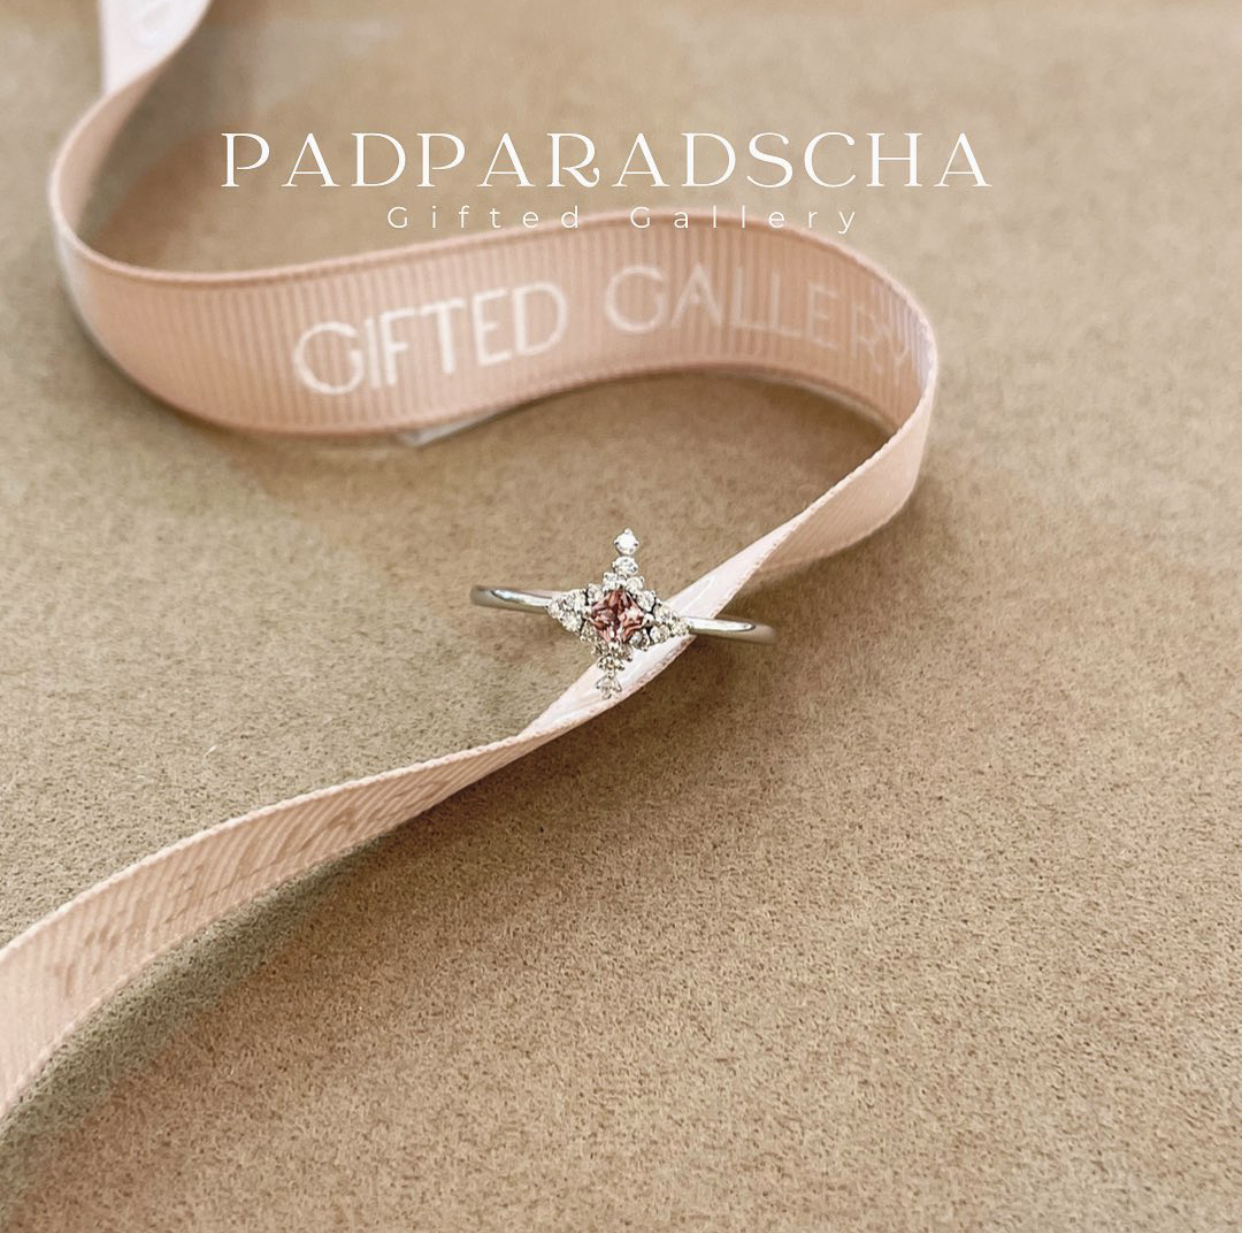 Sold＊Padparadscha Ring by Gifted Gallery